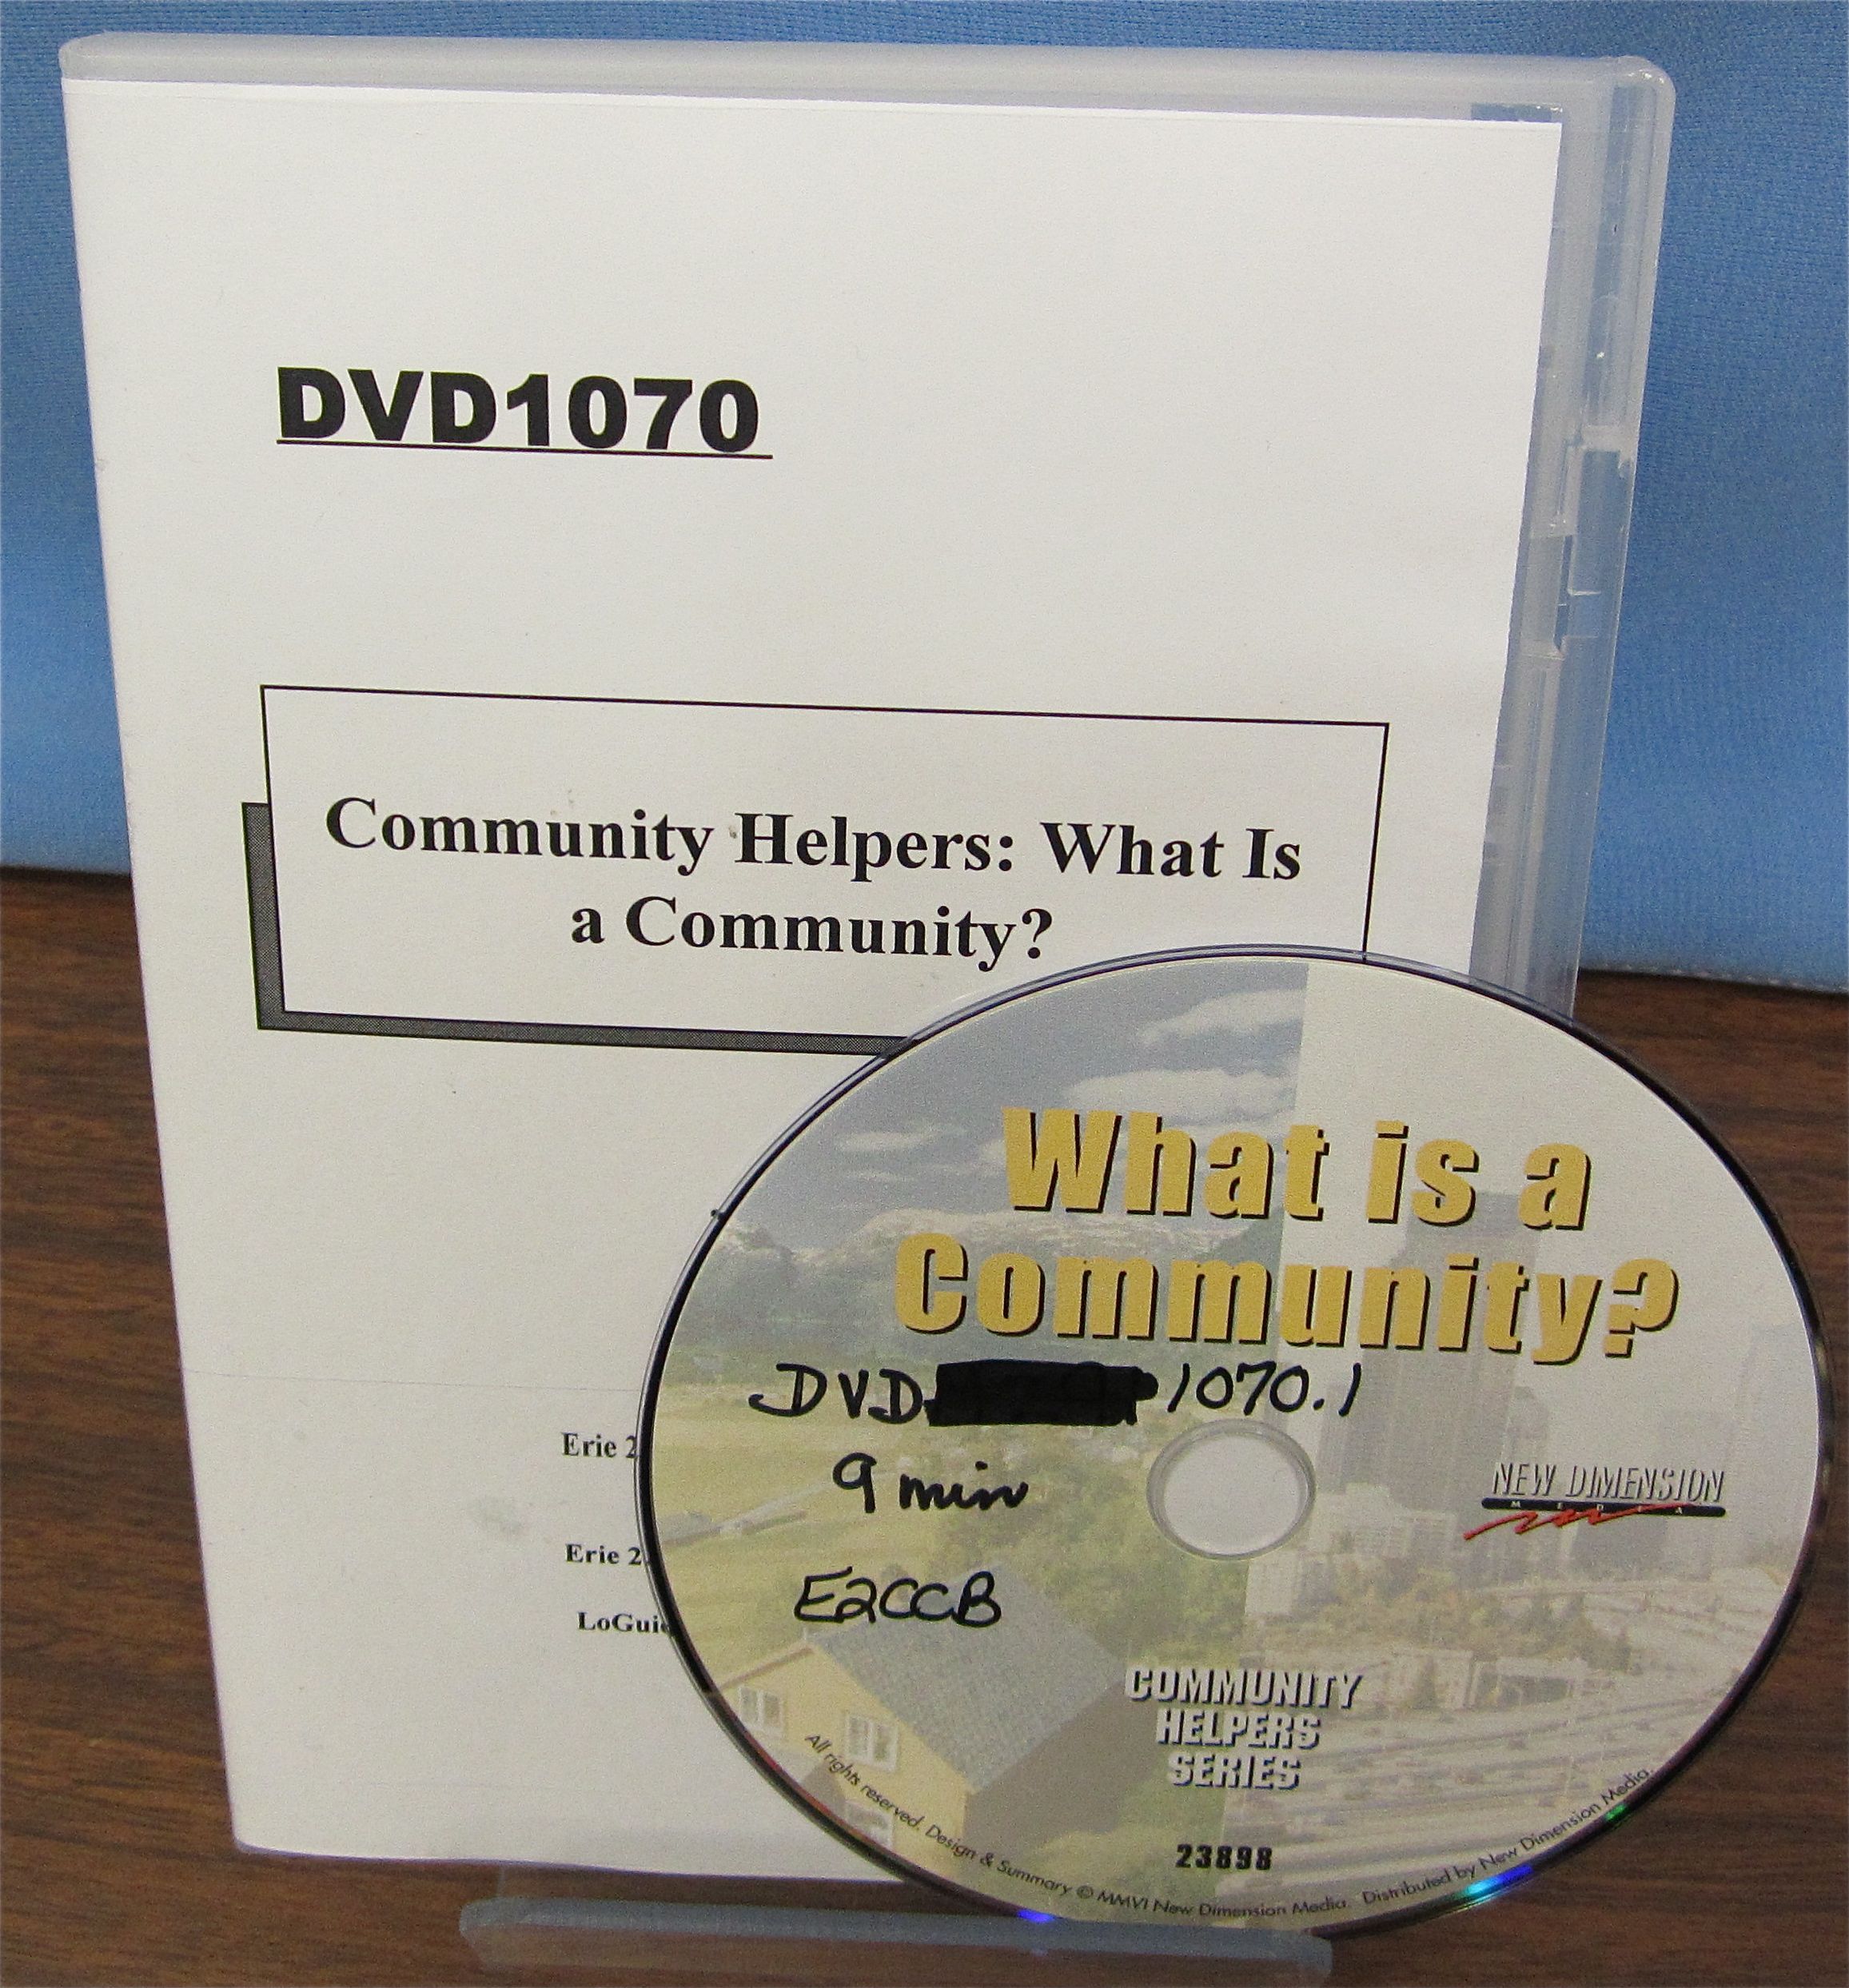 Community Helpers: What Is a Community?